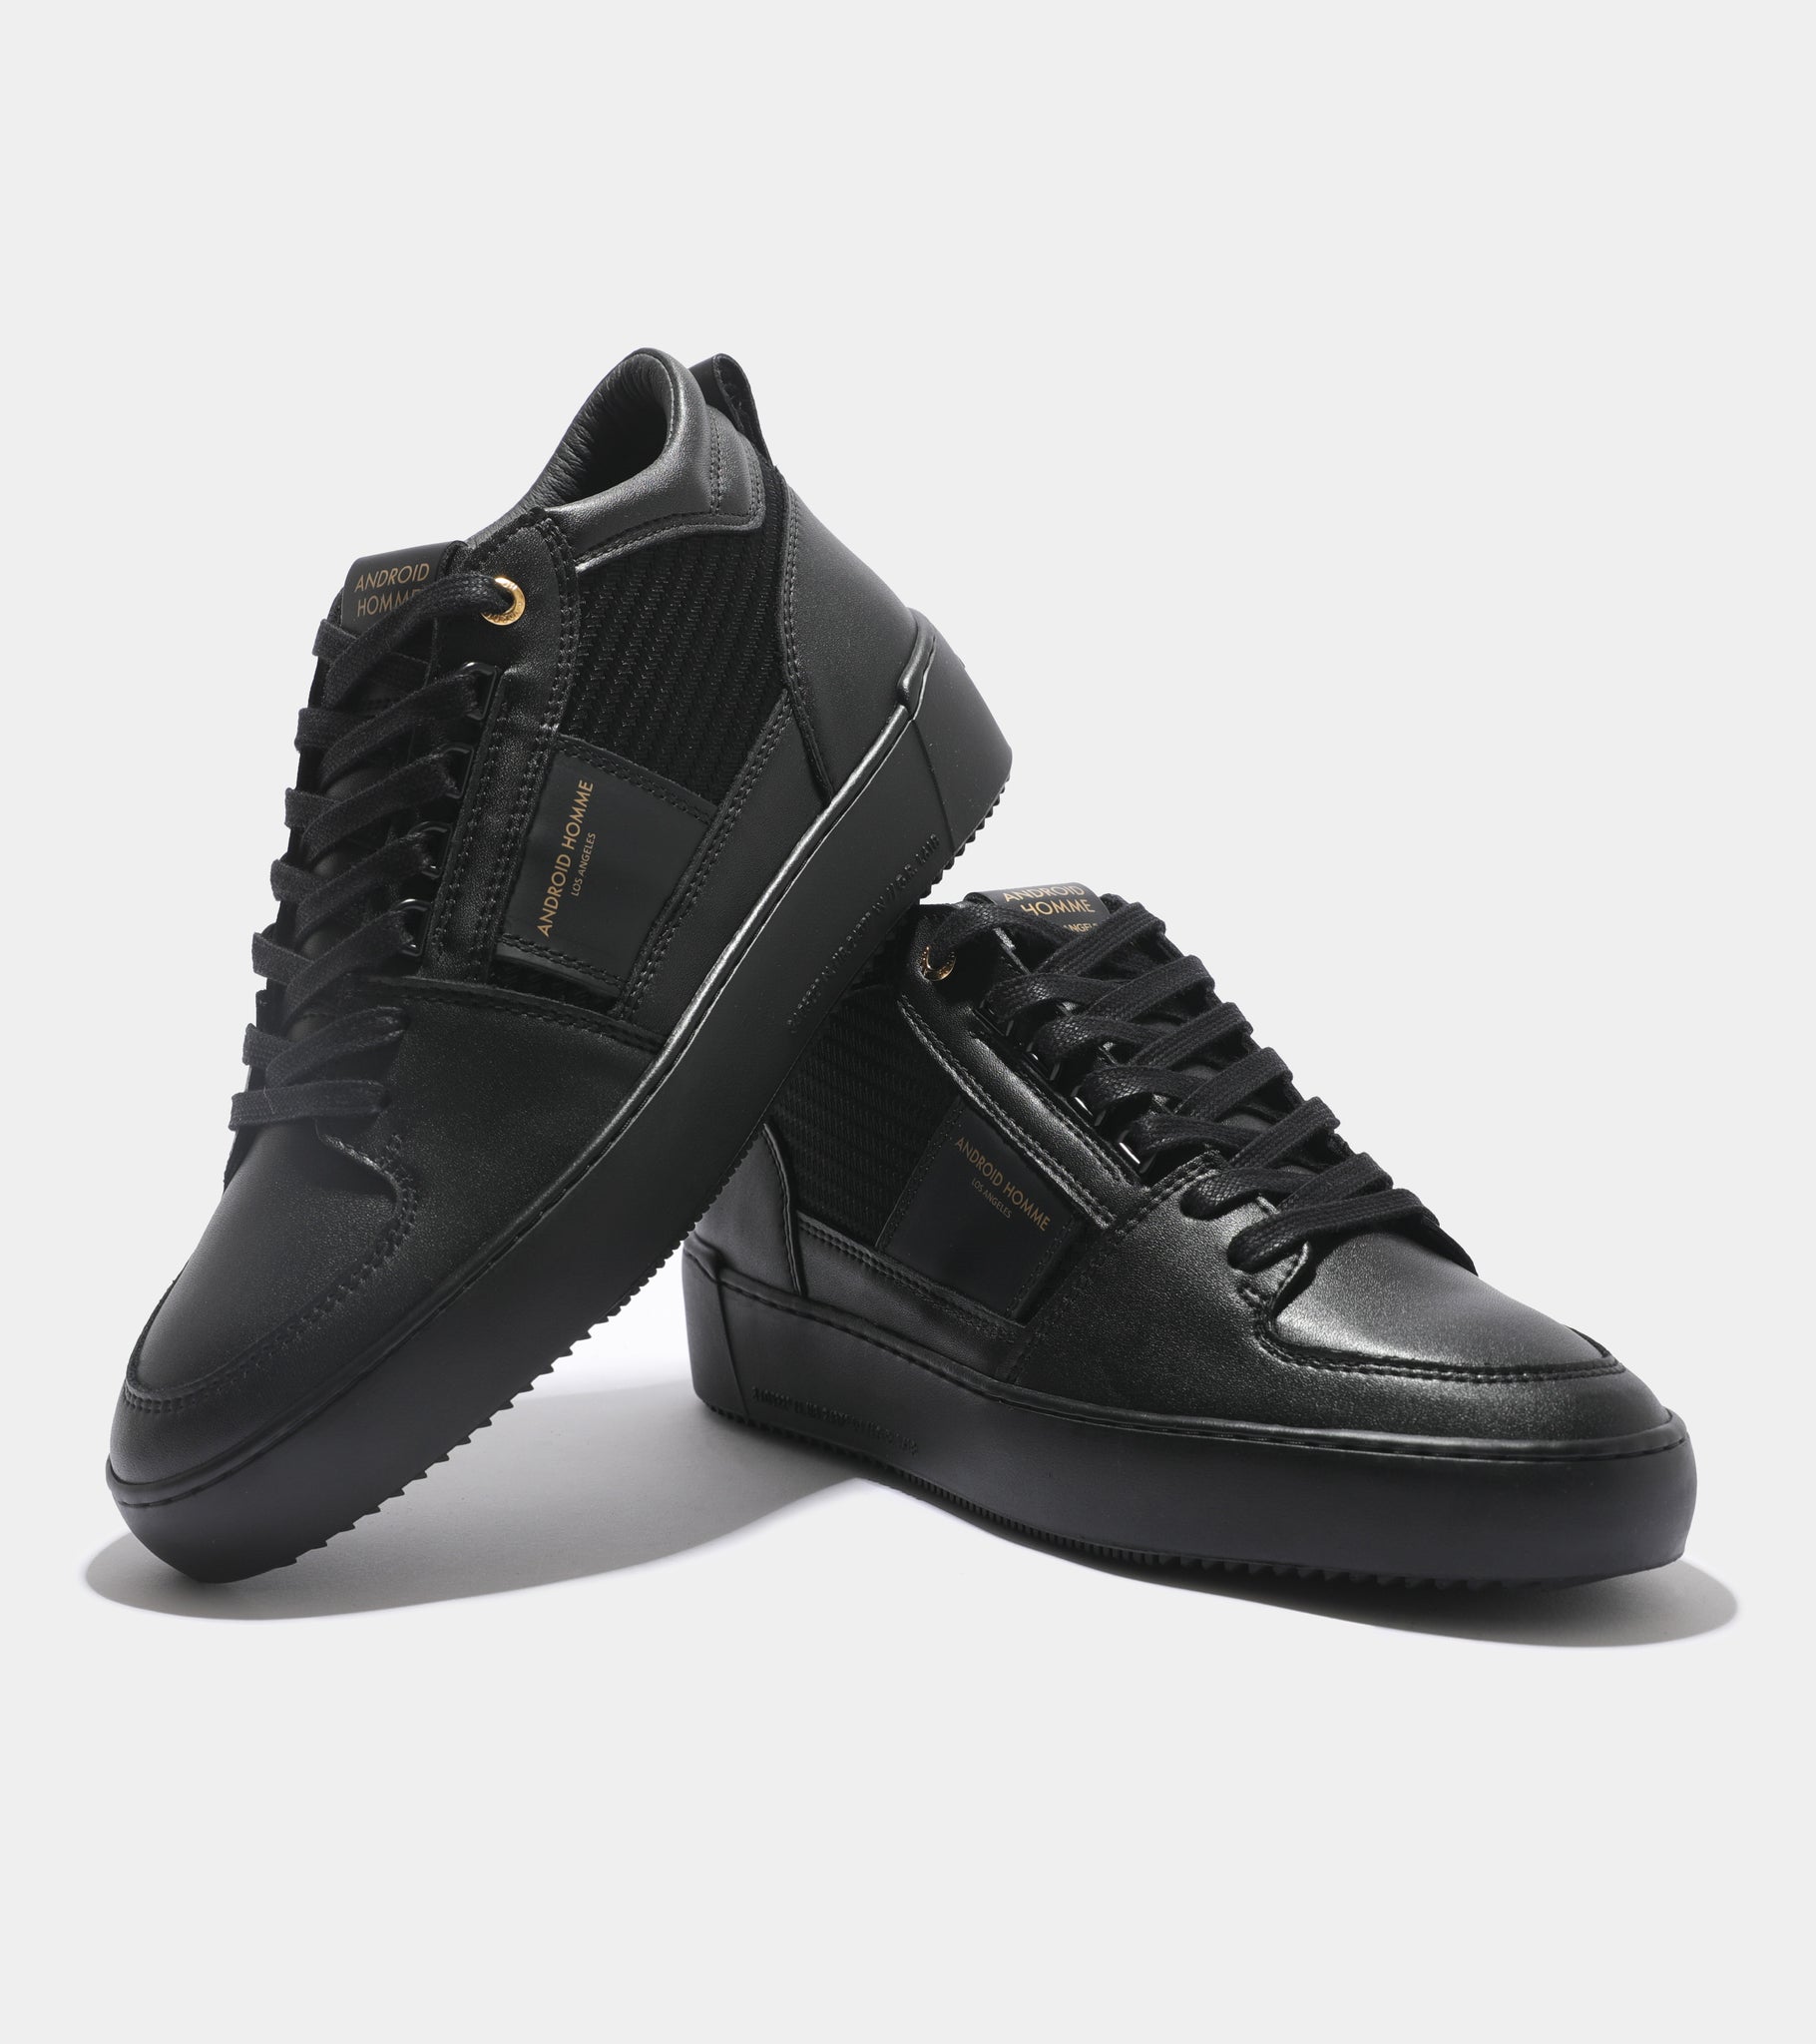 Ecom imagery of the Point Dume Black Carbon Fibre Android Homme Trainers.